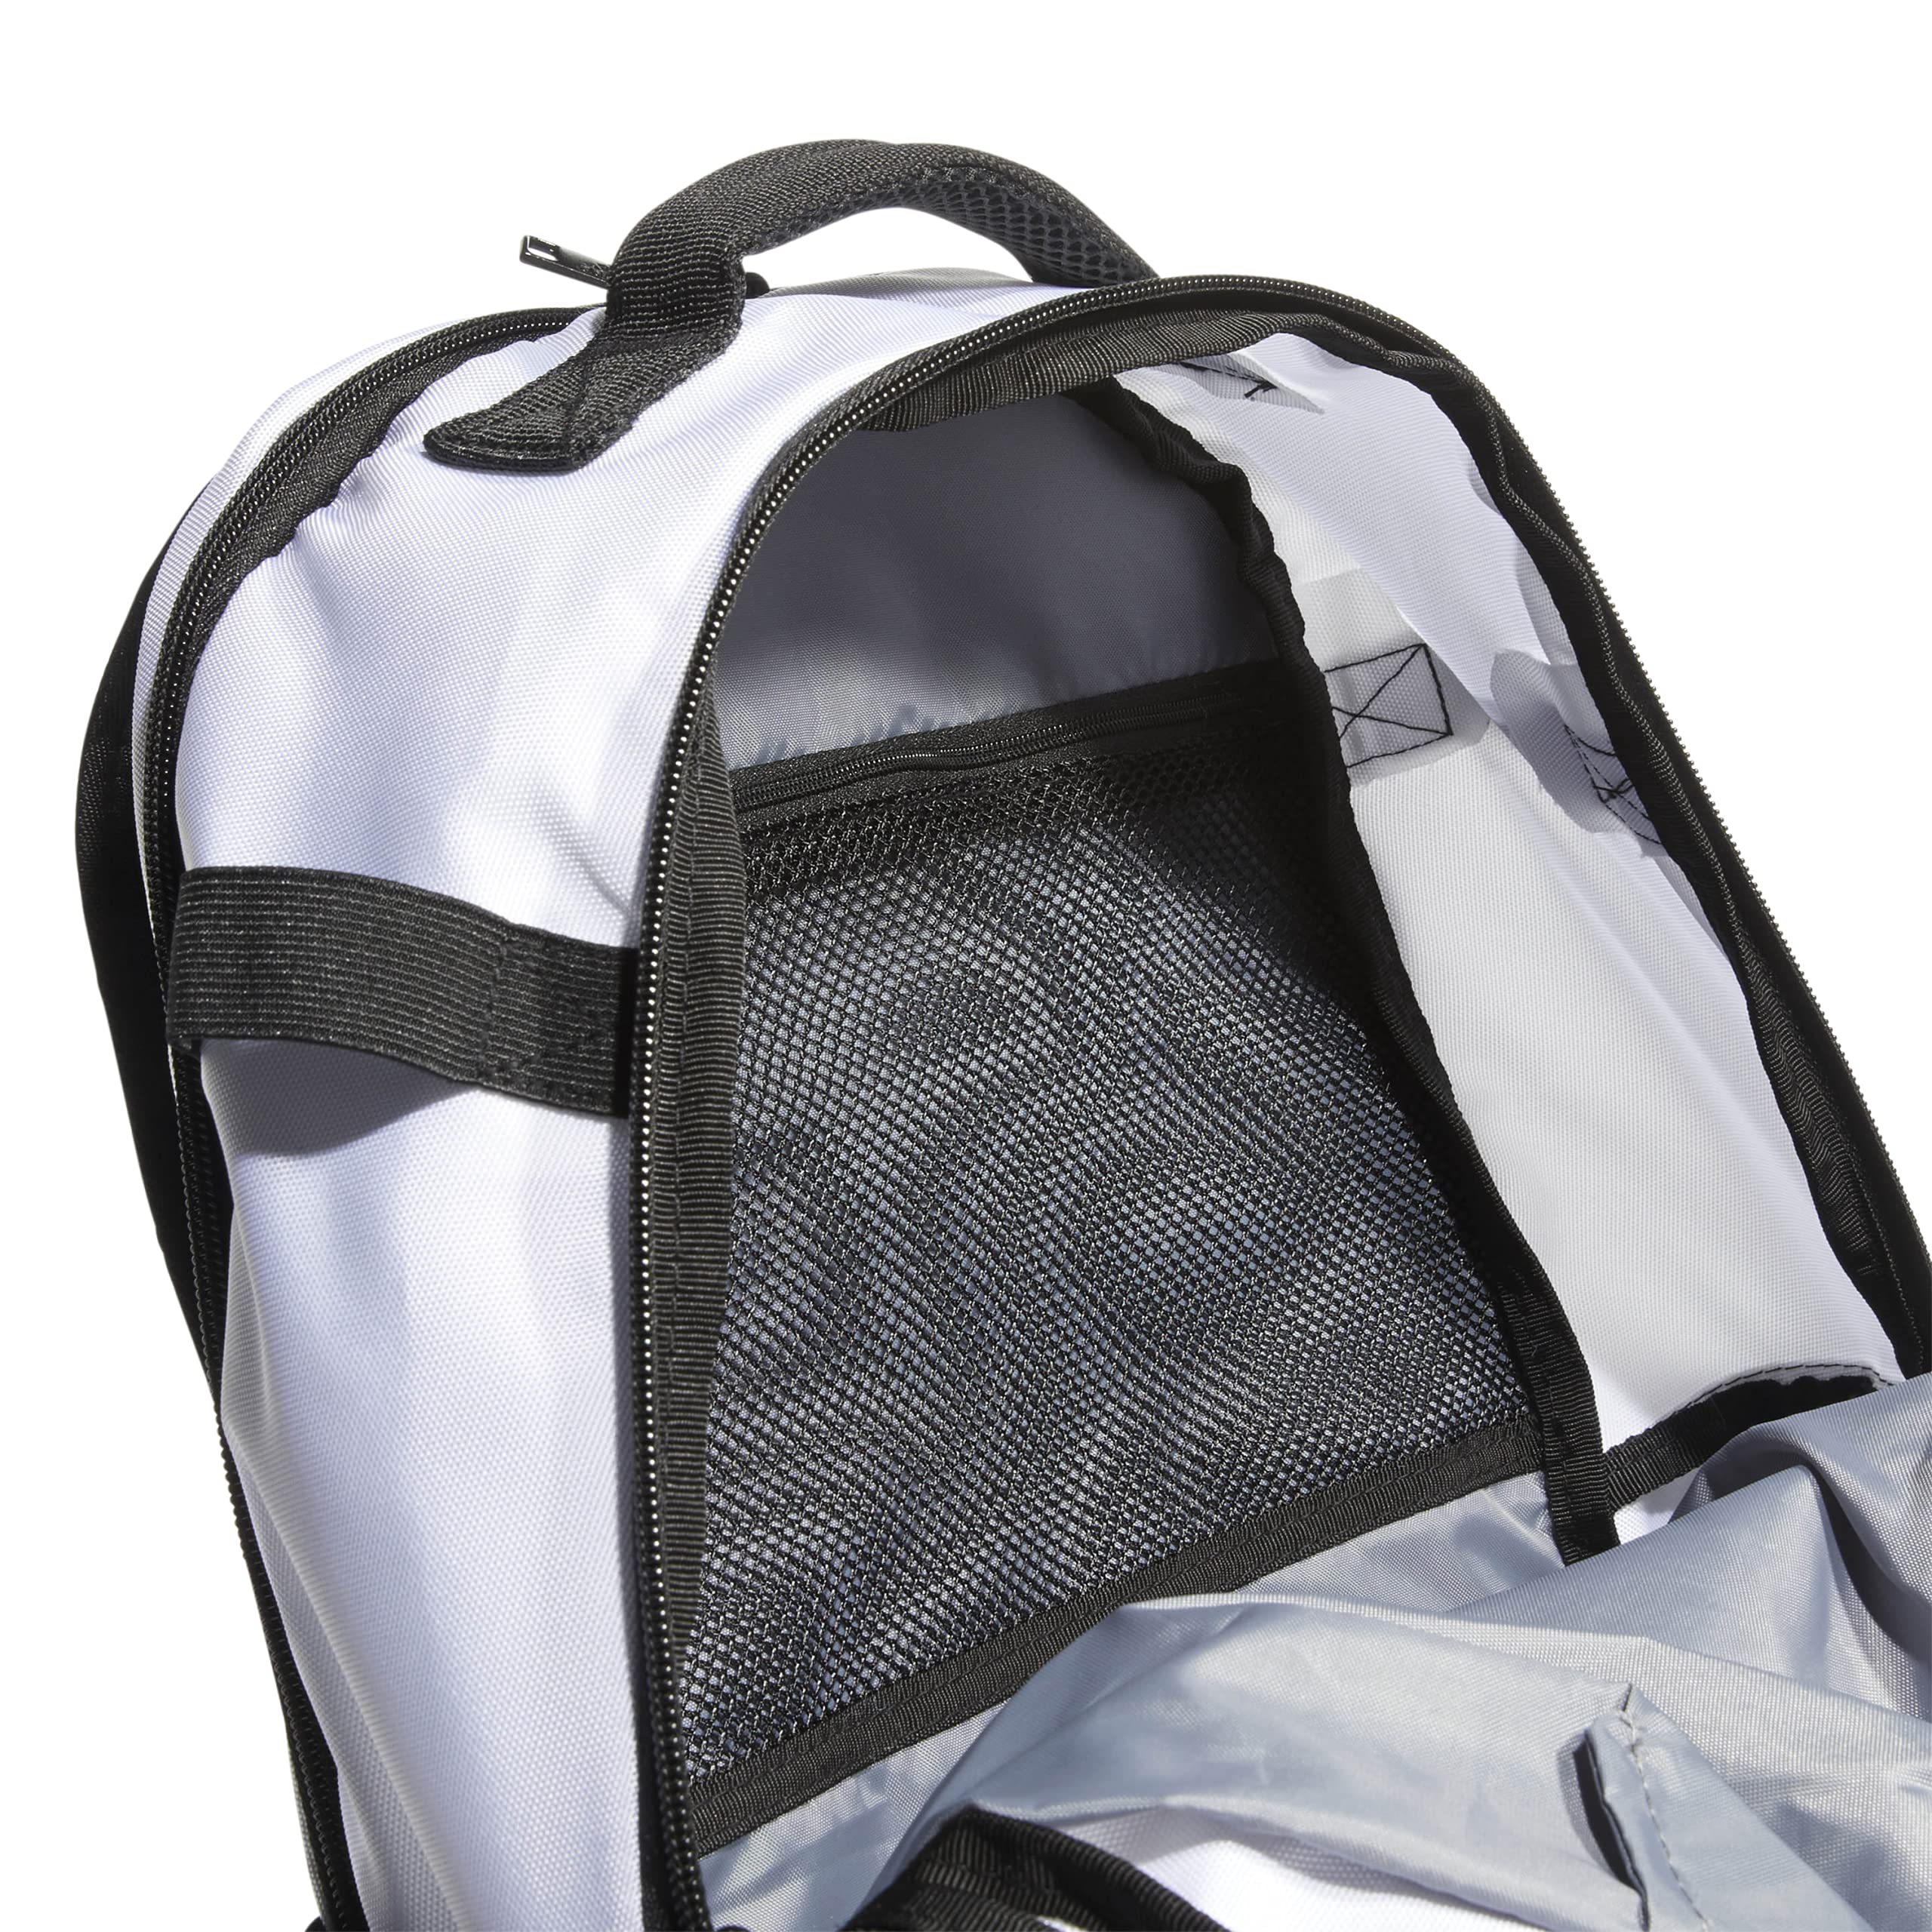 adidas 5-Star Team Backpack, White/Black, One Size